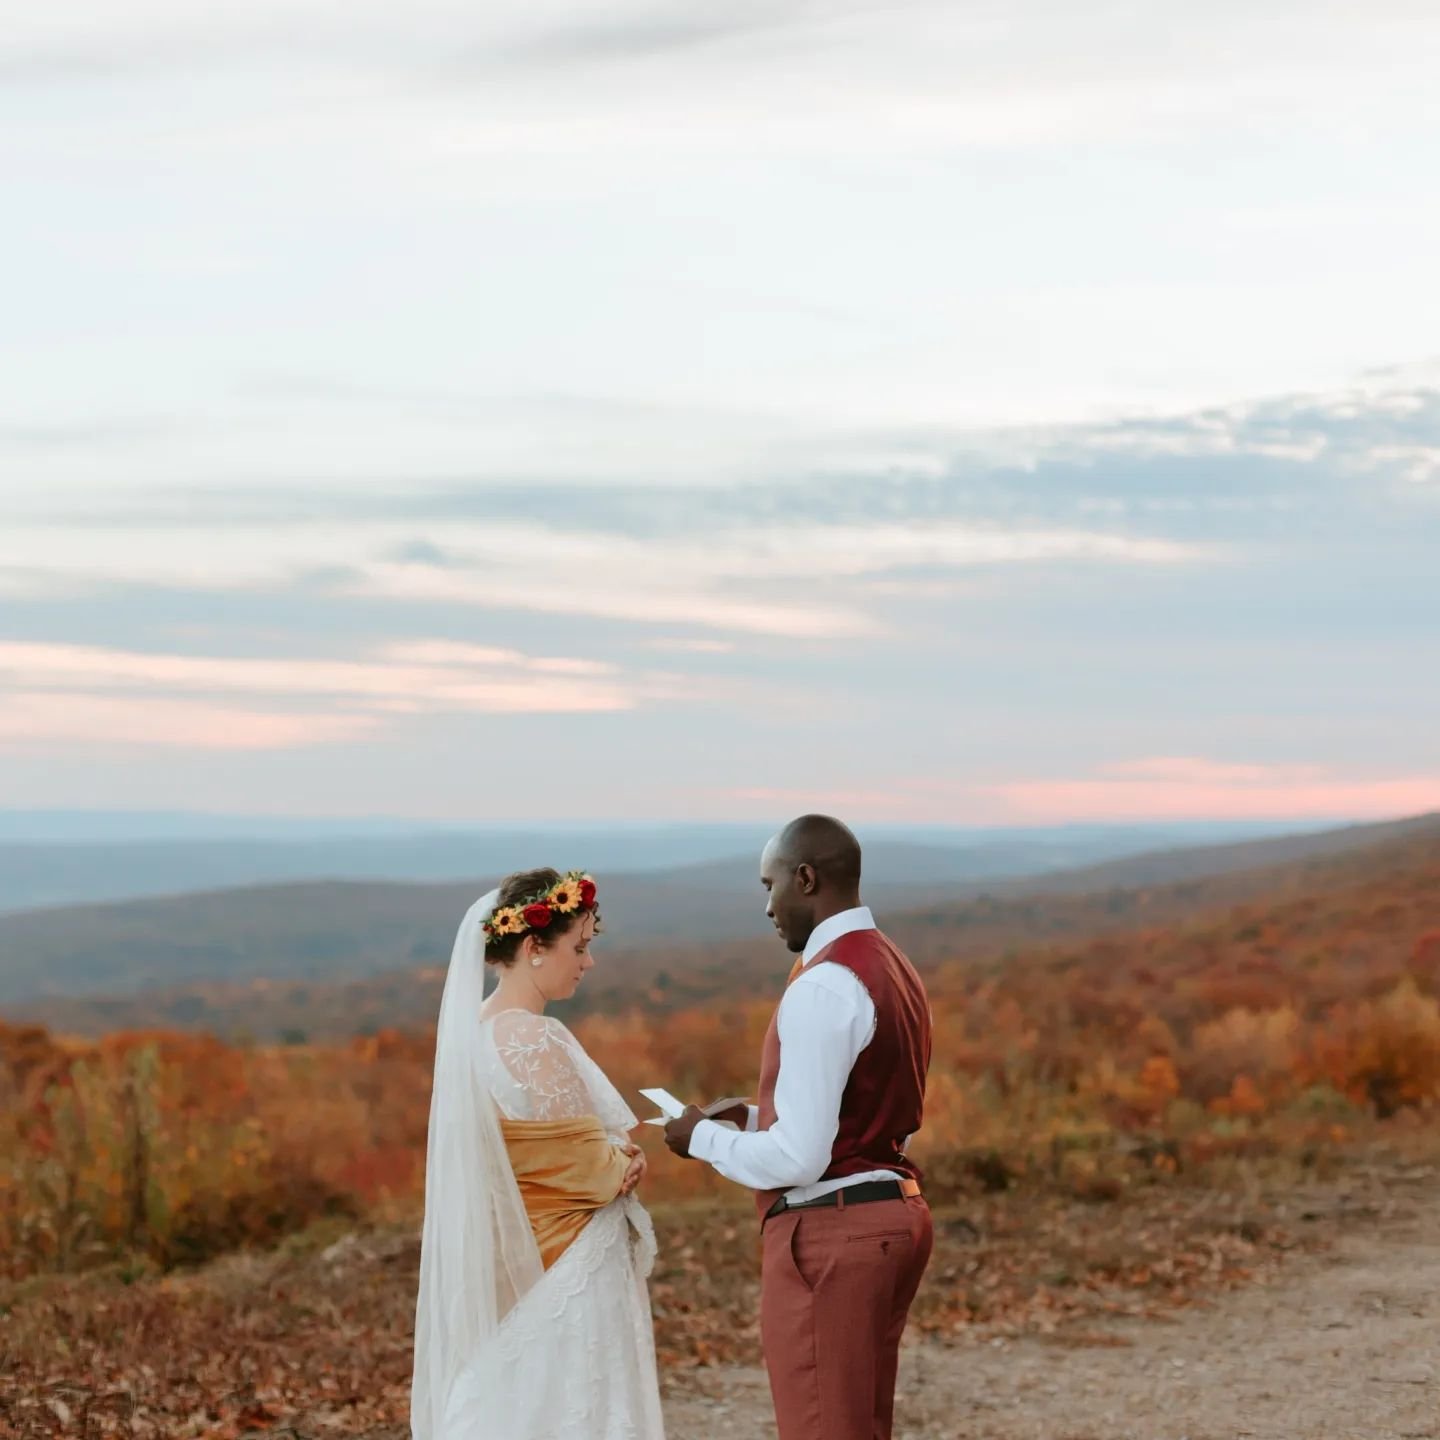 Did you know if you are getting married in PA you don't need an officiant or someone ordained to marry you?!⁠
⁠
Pennsylvania is one of four states where you can self-unite, making it extremely easy for couple&rsquo;s to elope here! In 2021, over 1,50